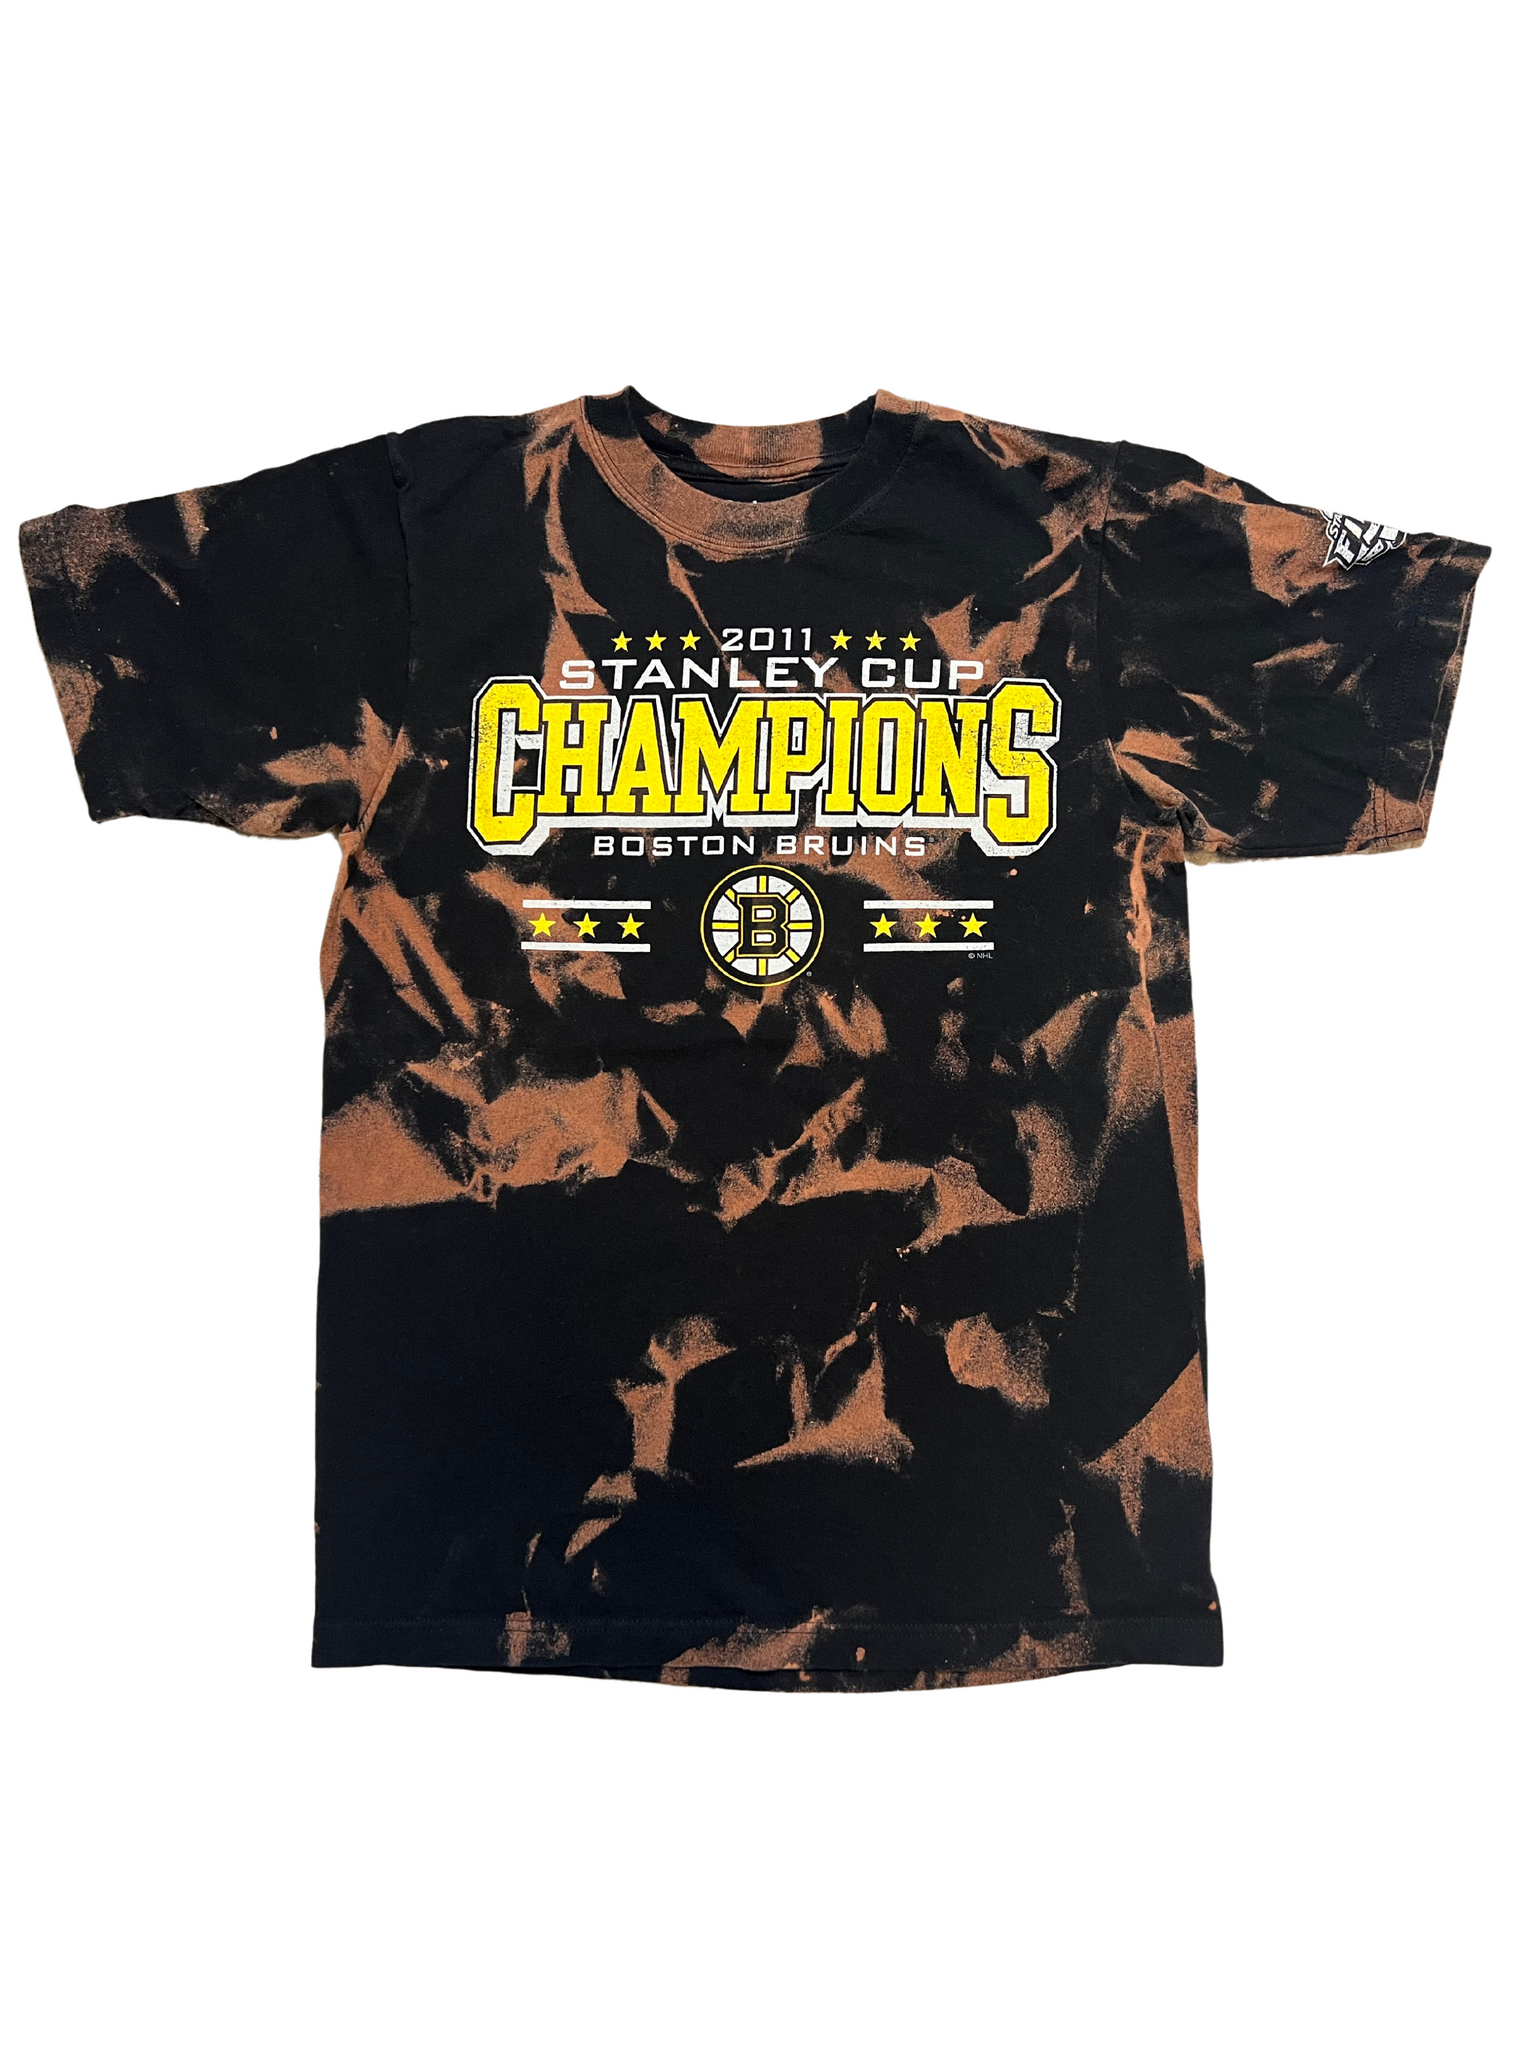 Boston Bruins 2011 Stanley Cup Champions Bleached Shirt